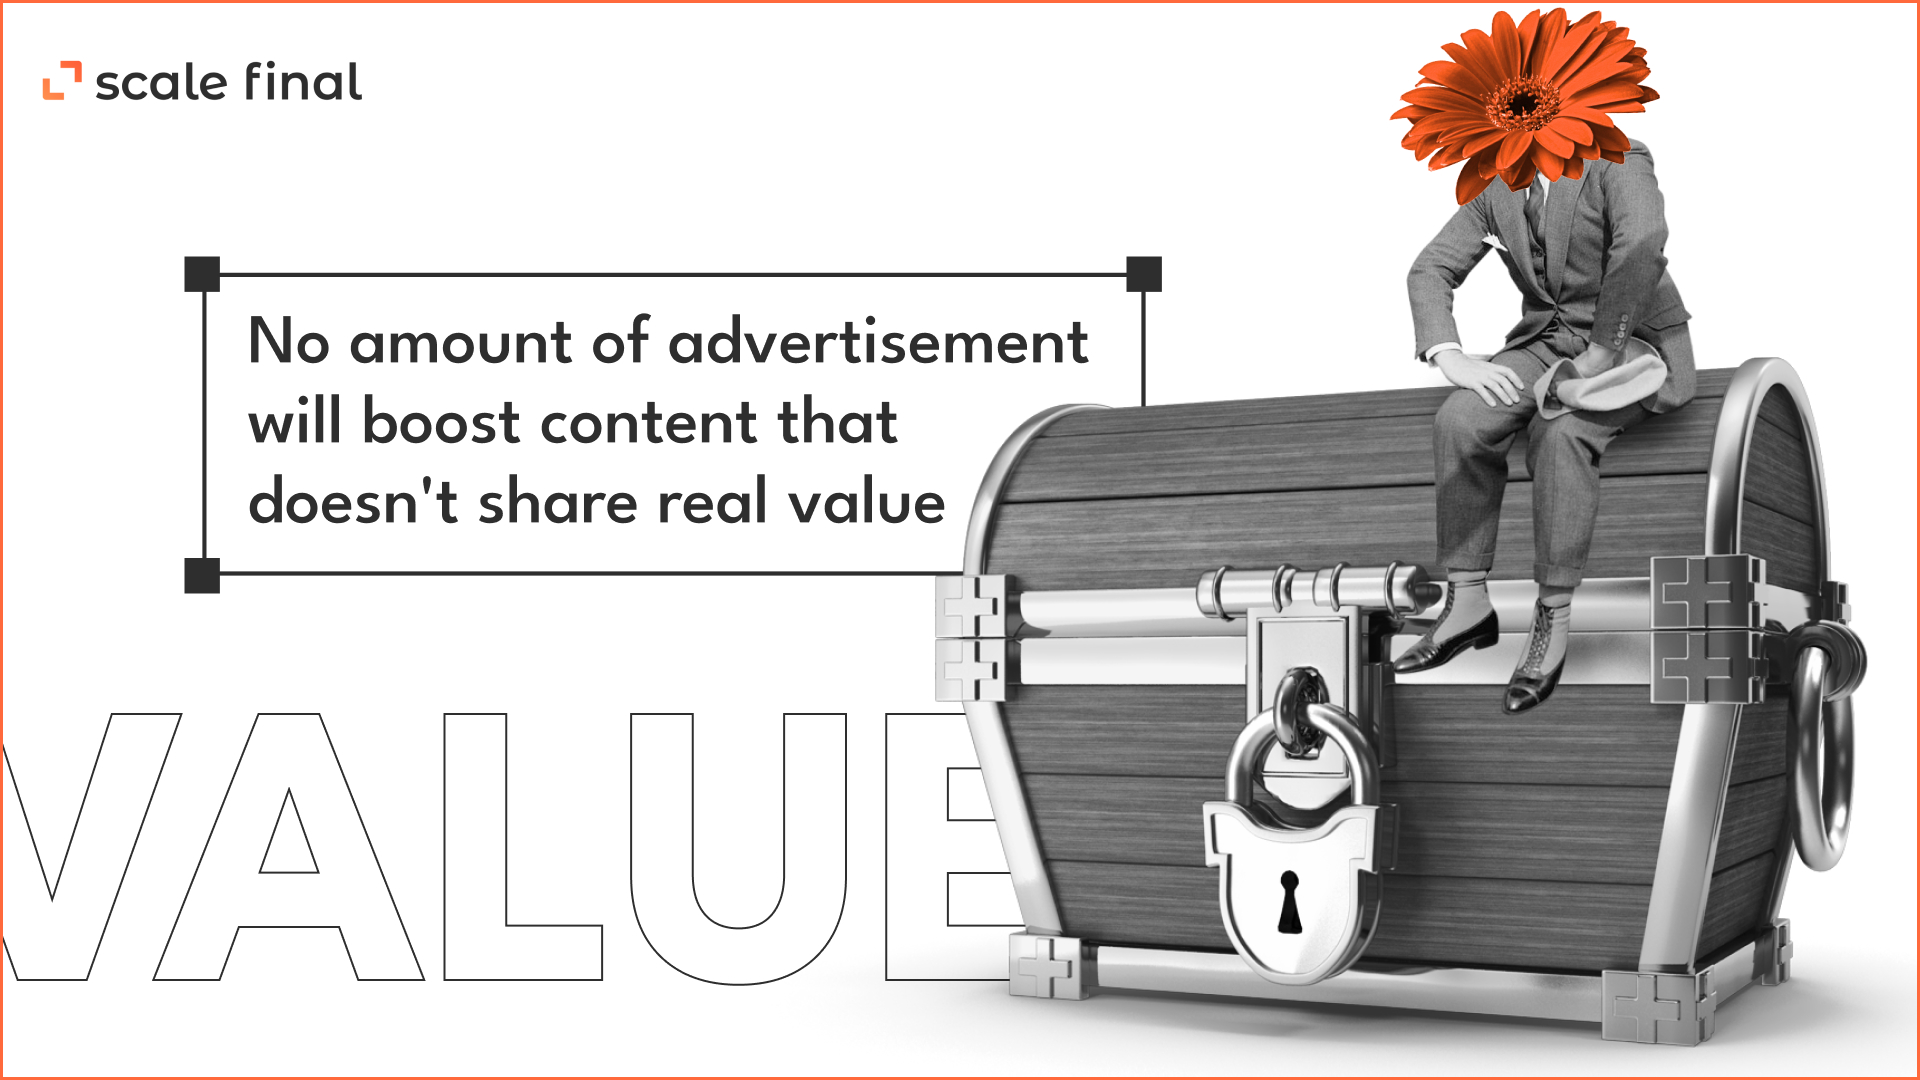 No amount of advertisement will boost content that doesn't share real value